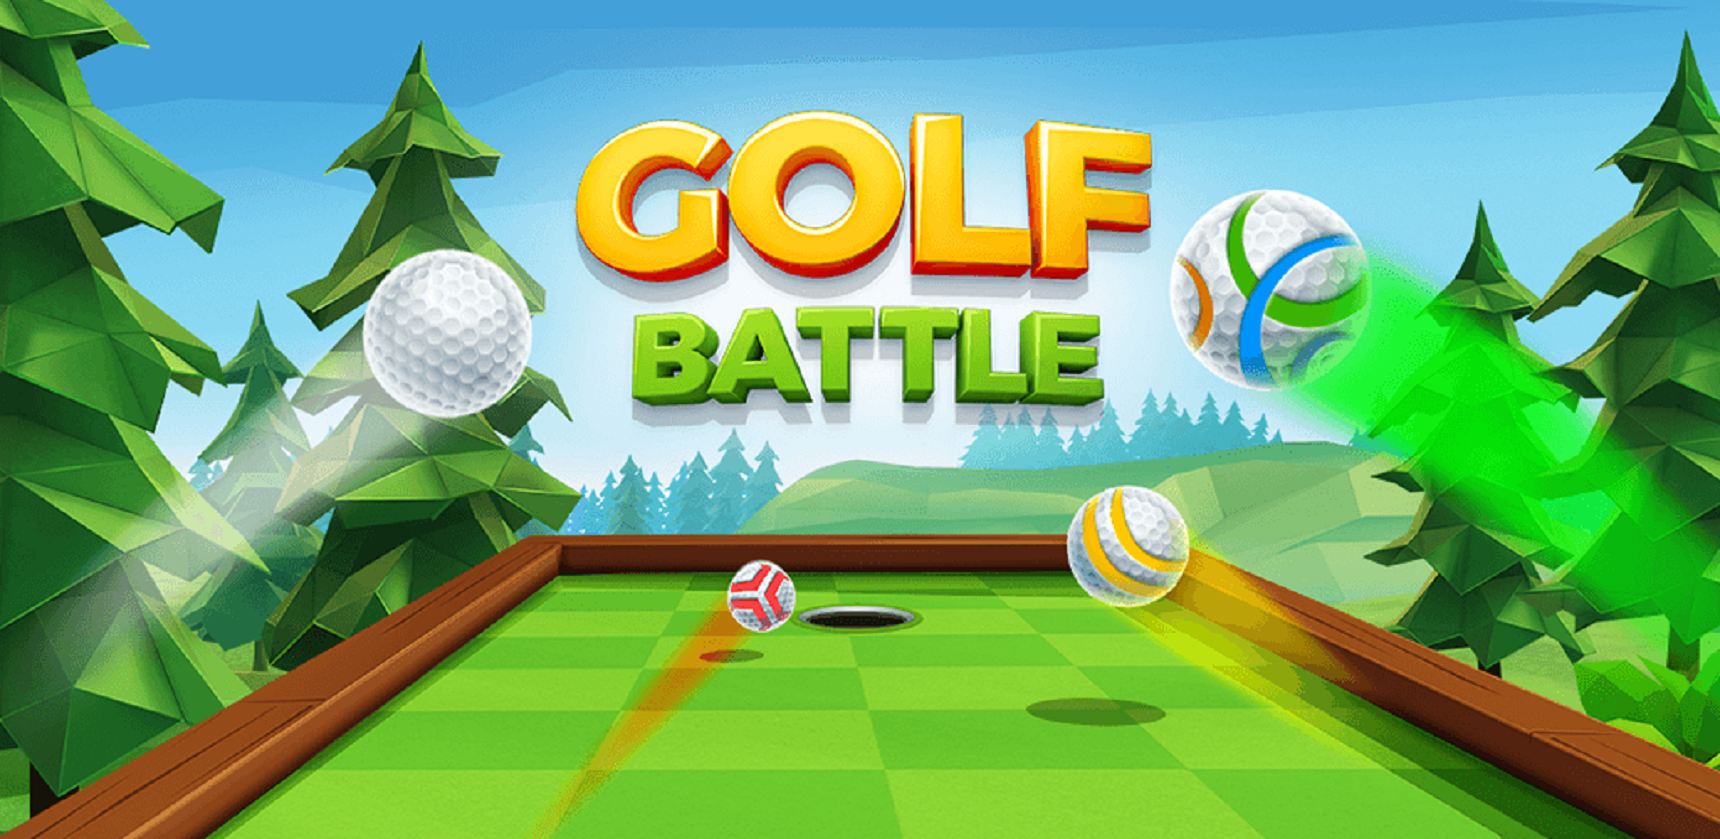 Game Golf Android Golf Battle MOD v2.4.1 (Freeze Bots, Unlocked All)